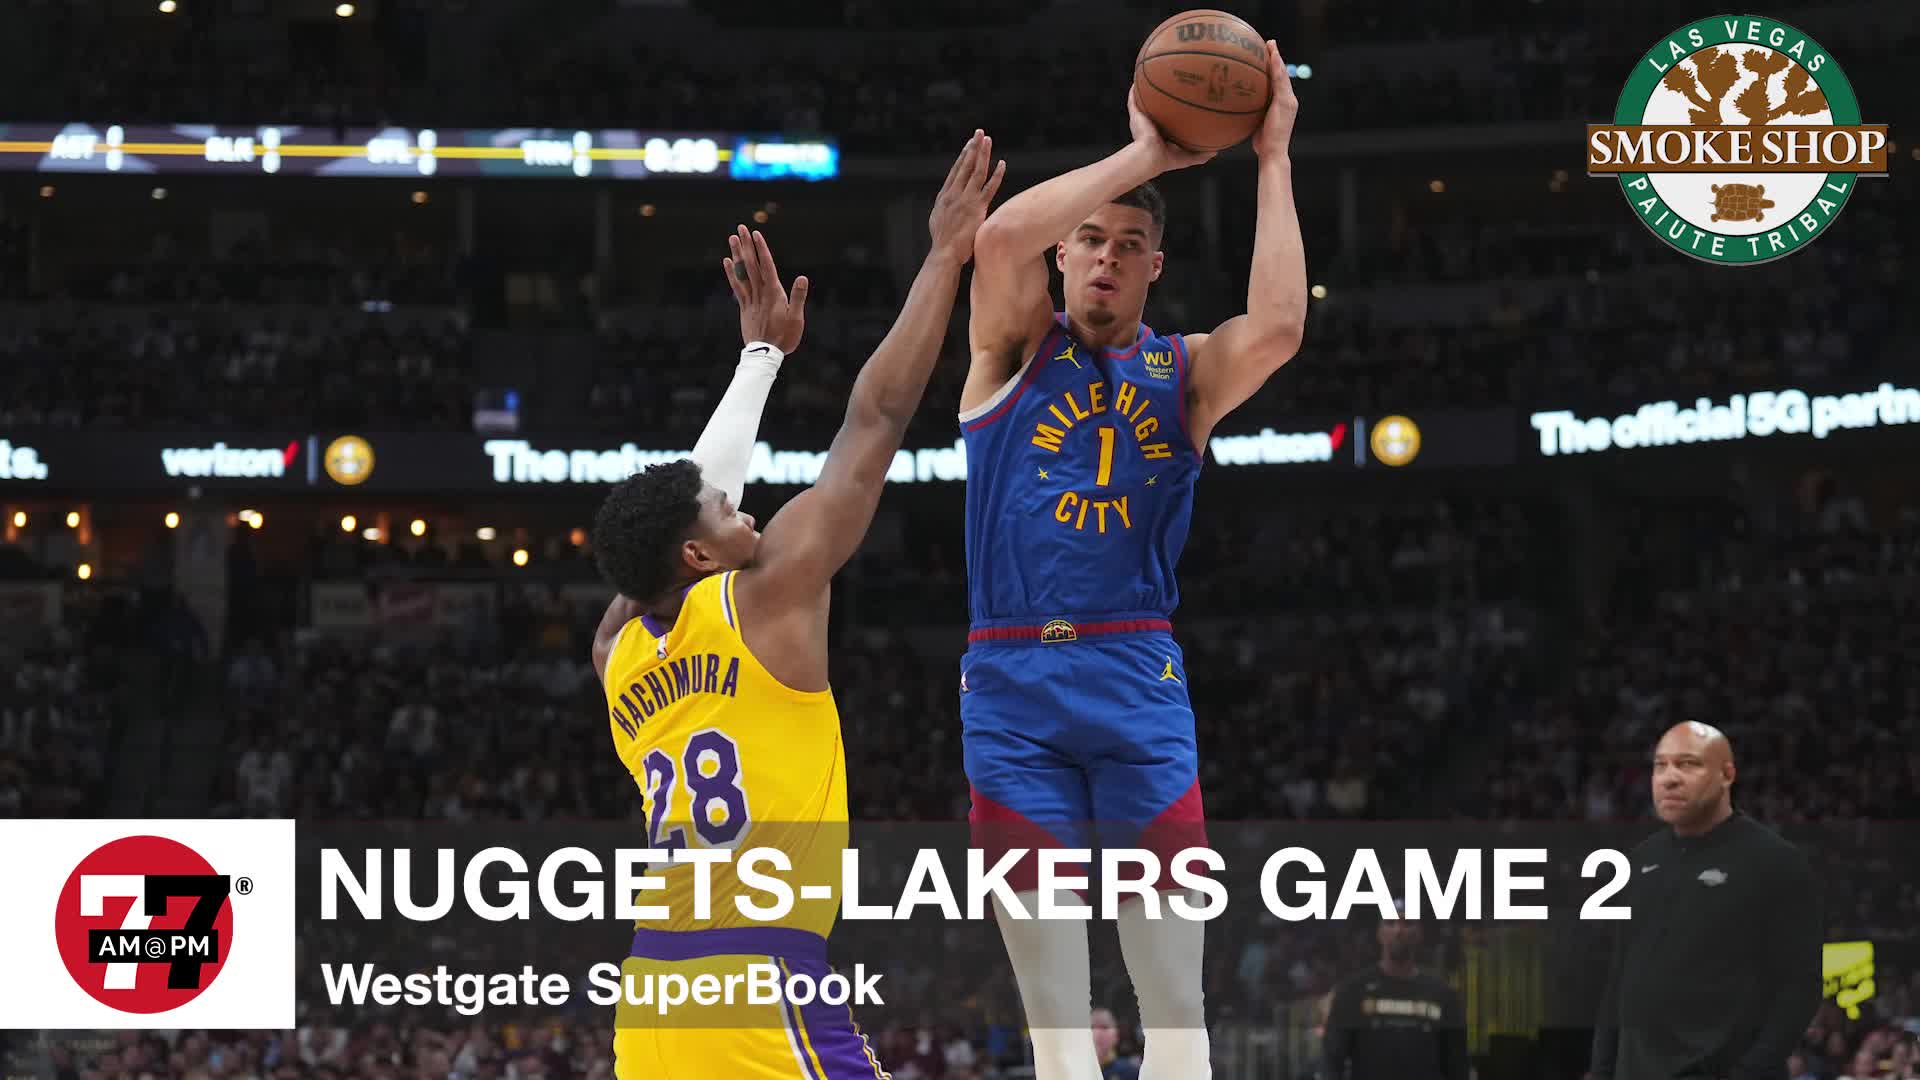 Nuggets-Lakers game two